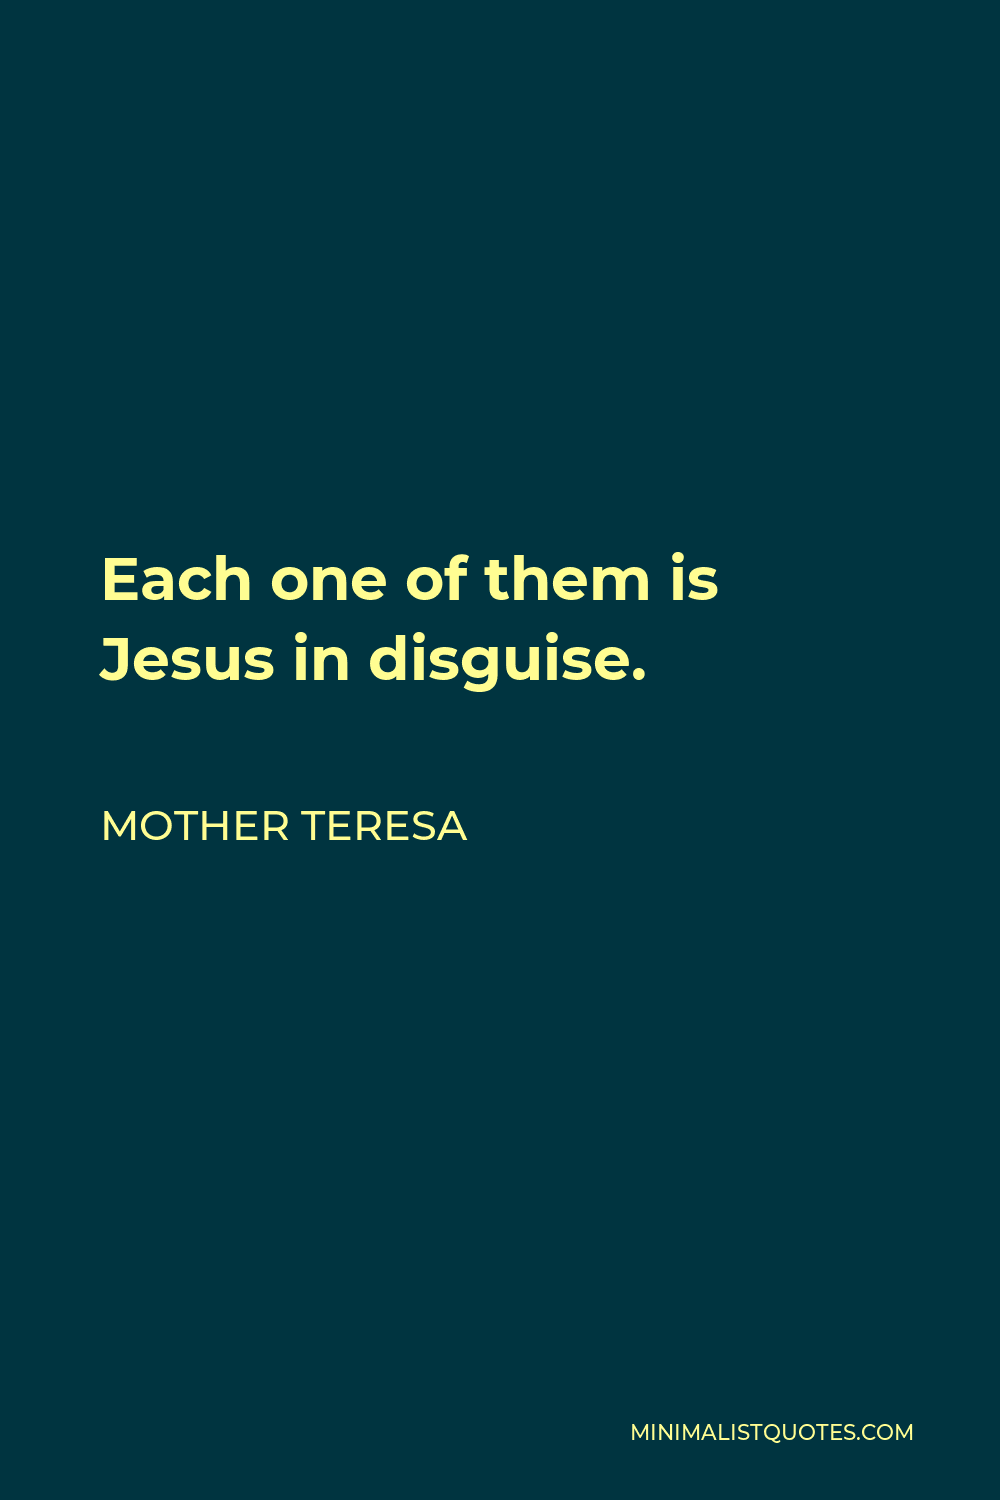 Mother Teresa Quote: Each one of them is Jesus in disguise.